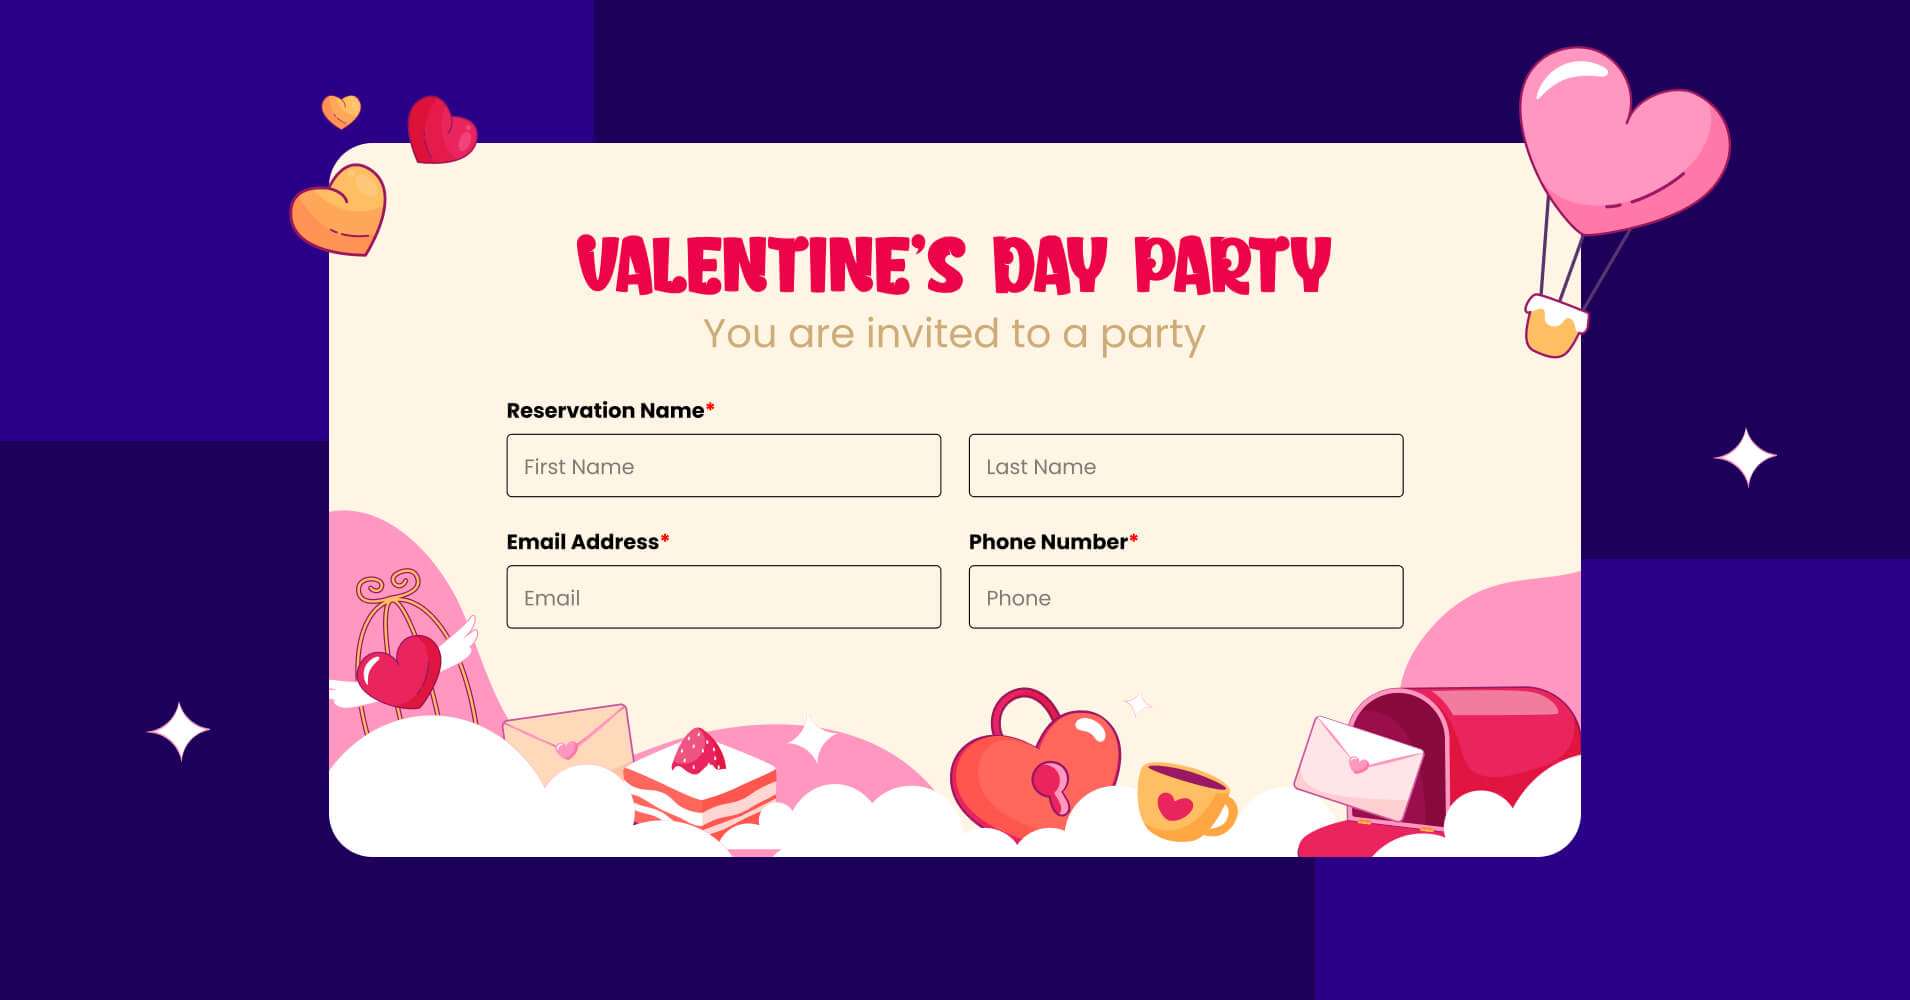 Valentine's Day Party Invitation Form